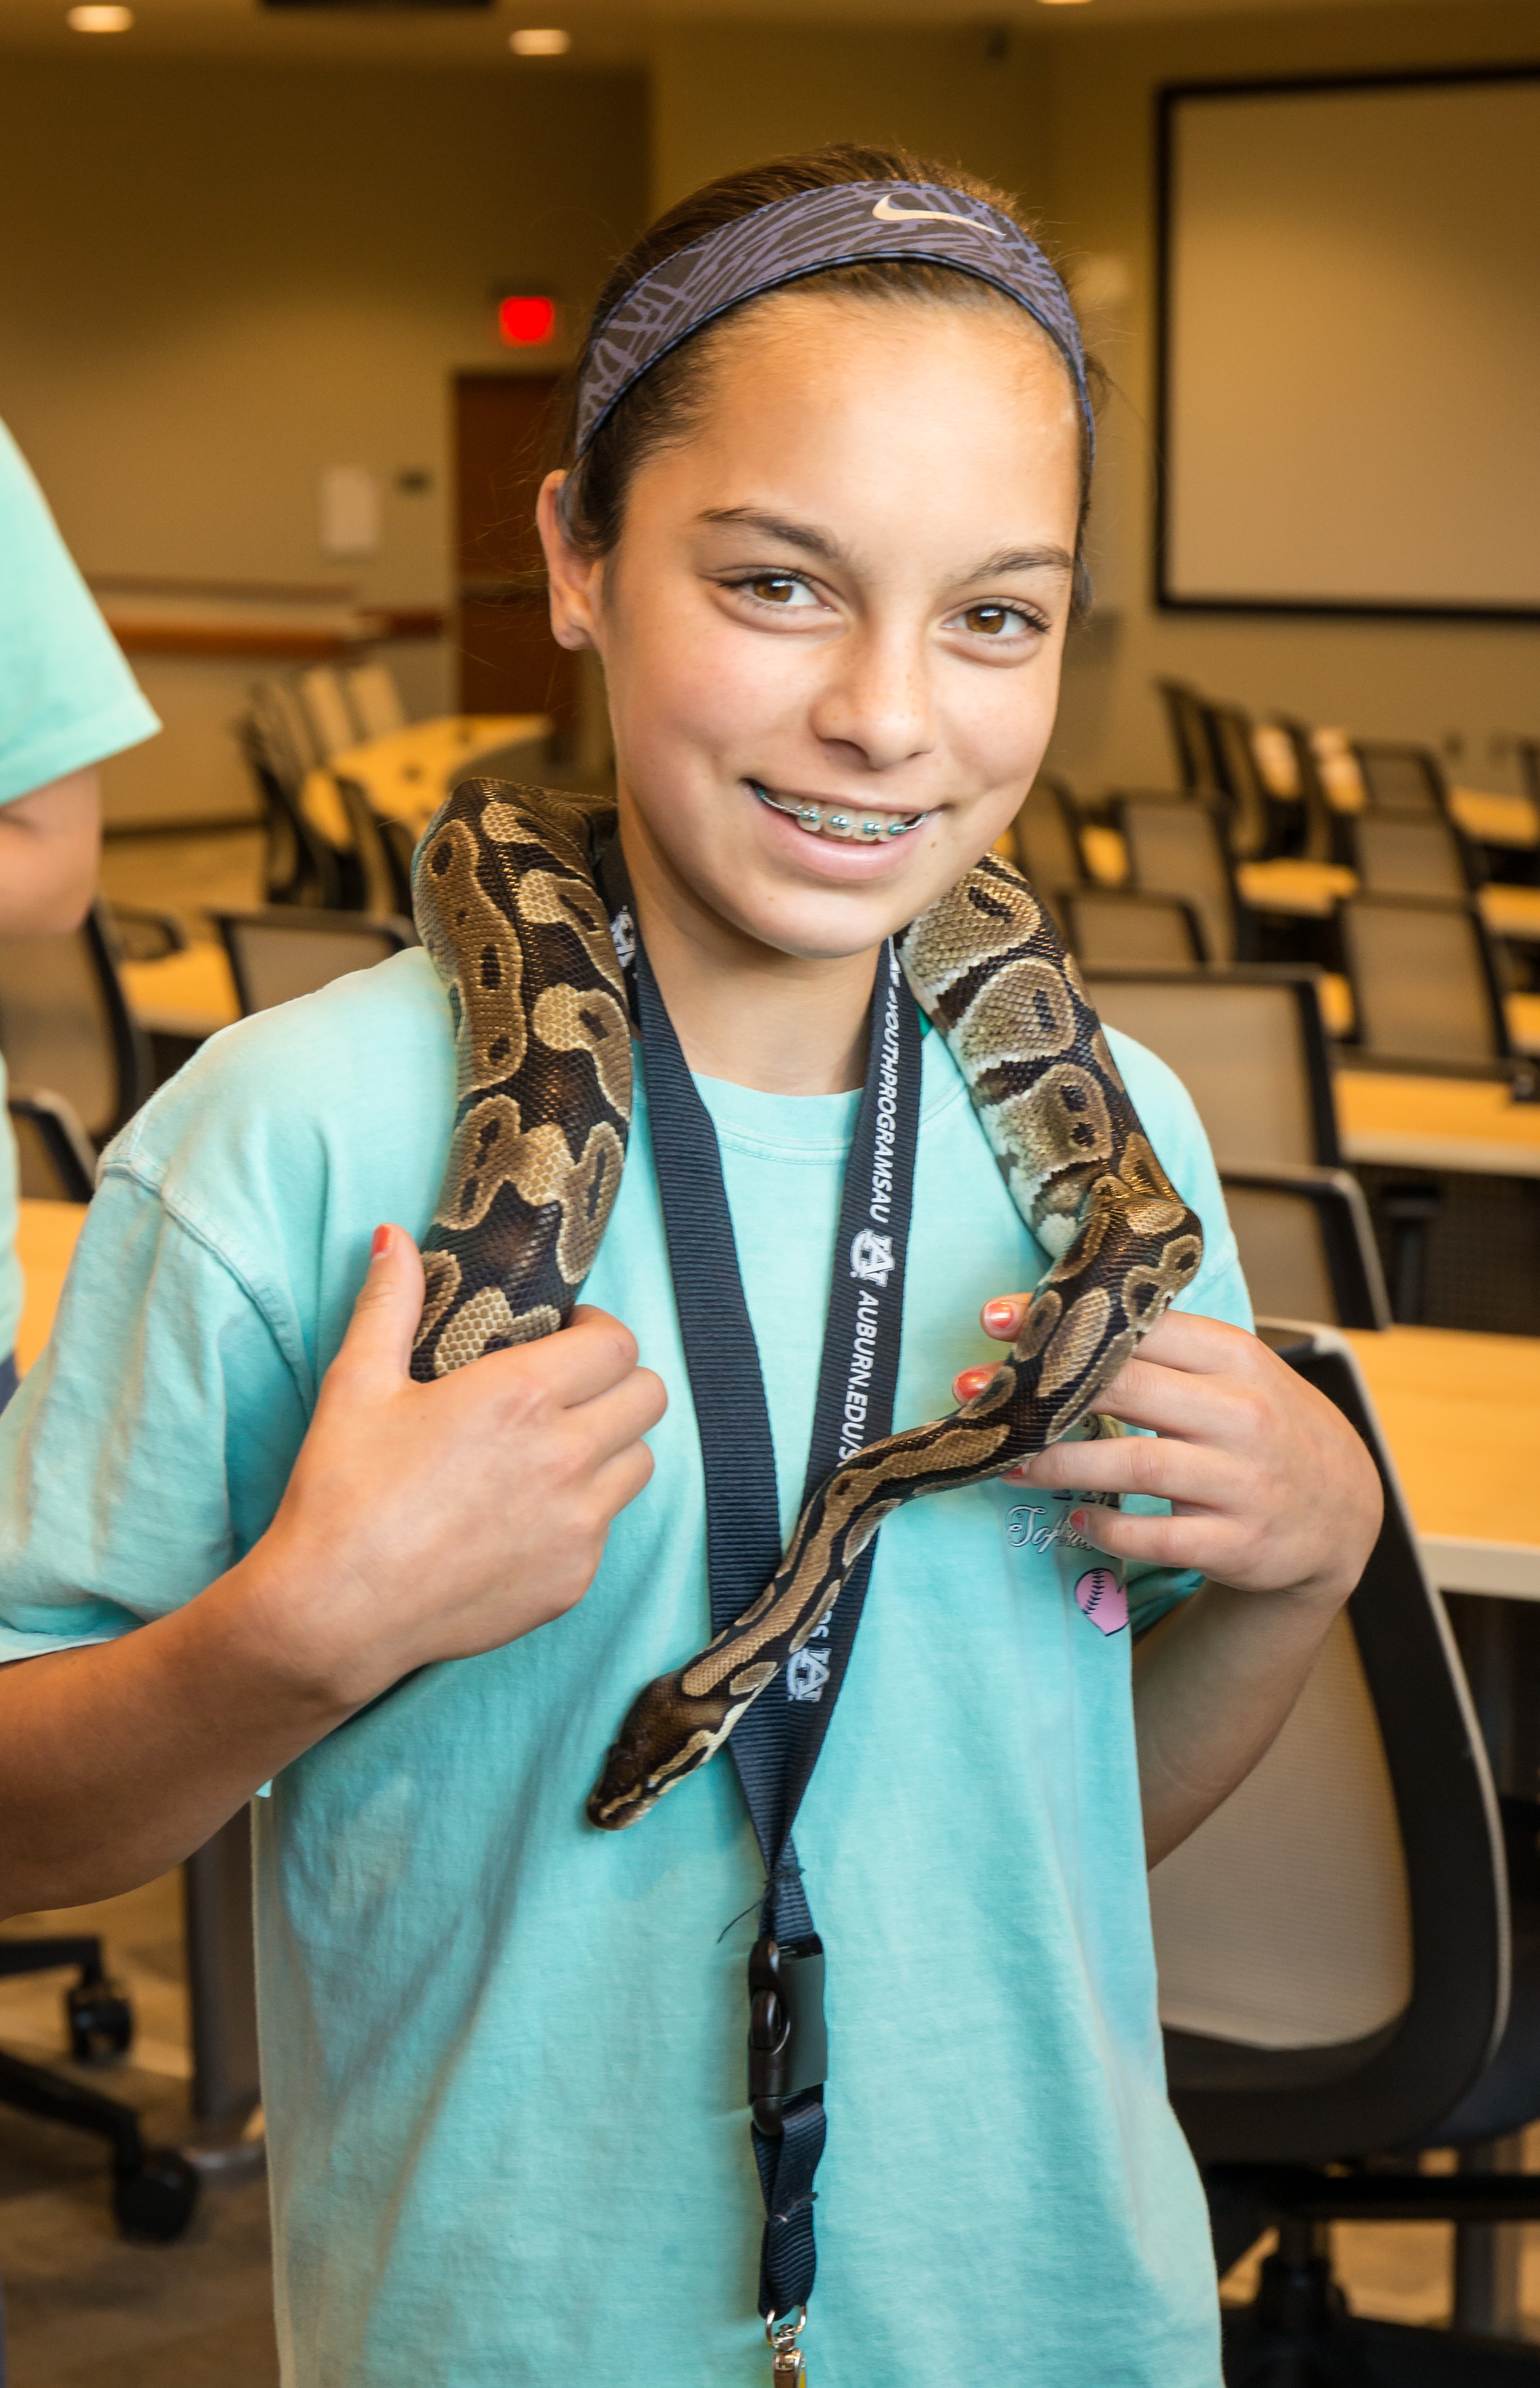 The Vet Set Go u201cBecome a Veterinarian Camp Contest" is open to students entering 6th to 8th grade in the fall of 2023.